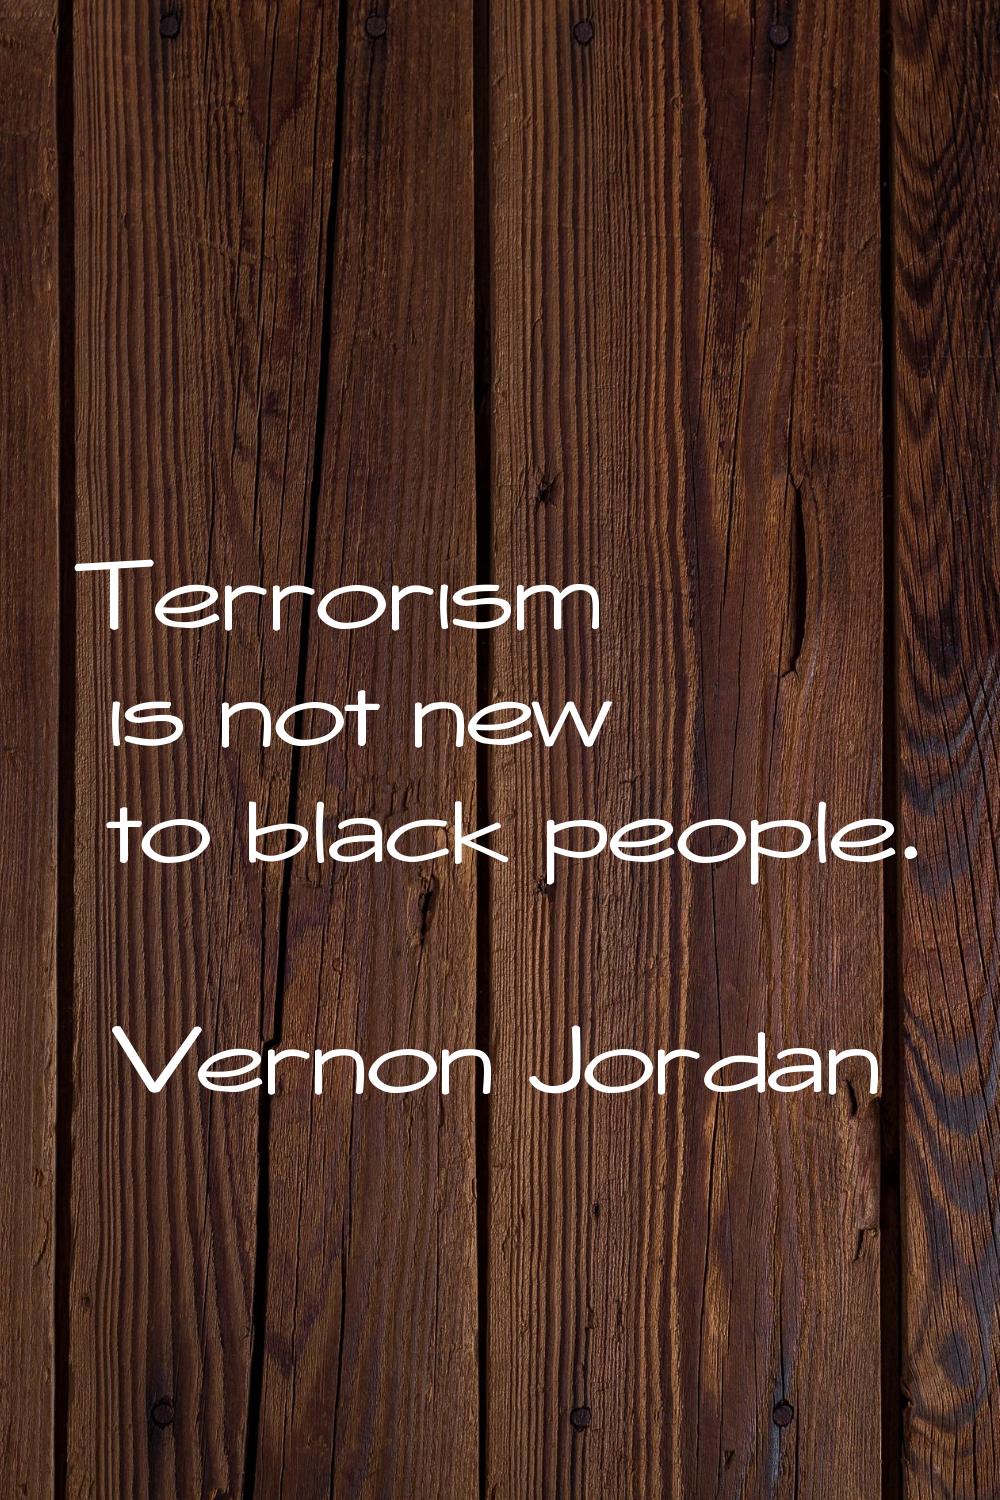 Terrorism is not new to black people.